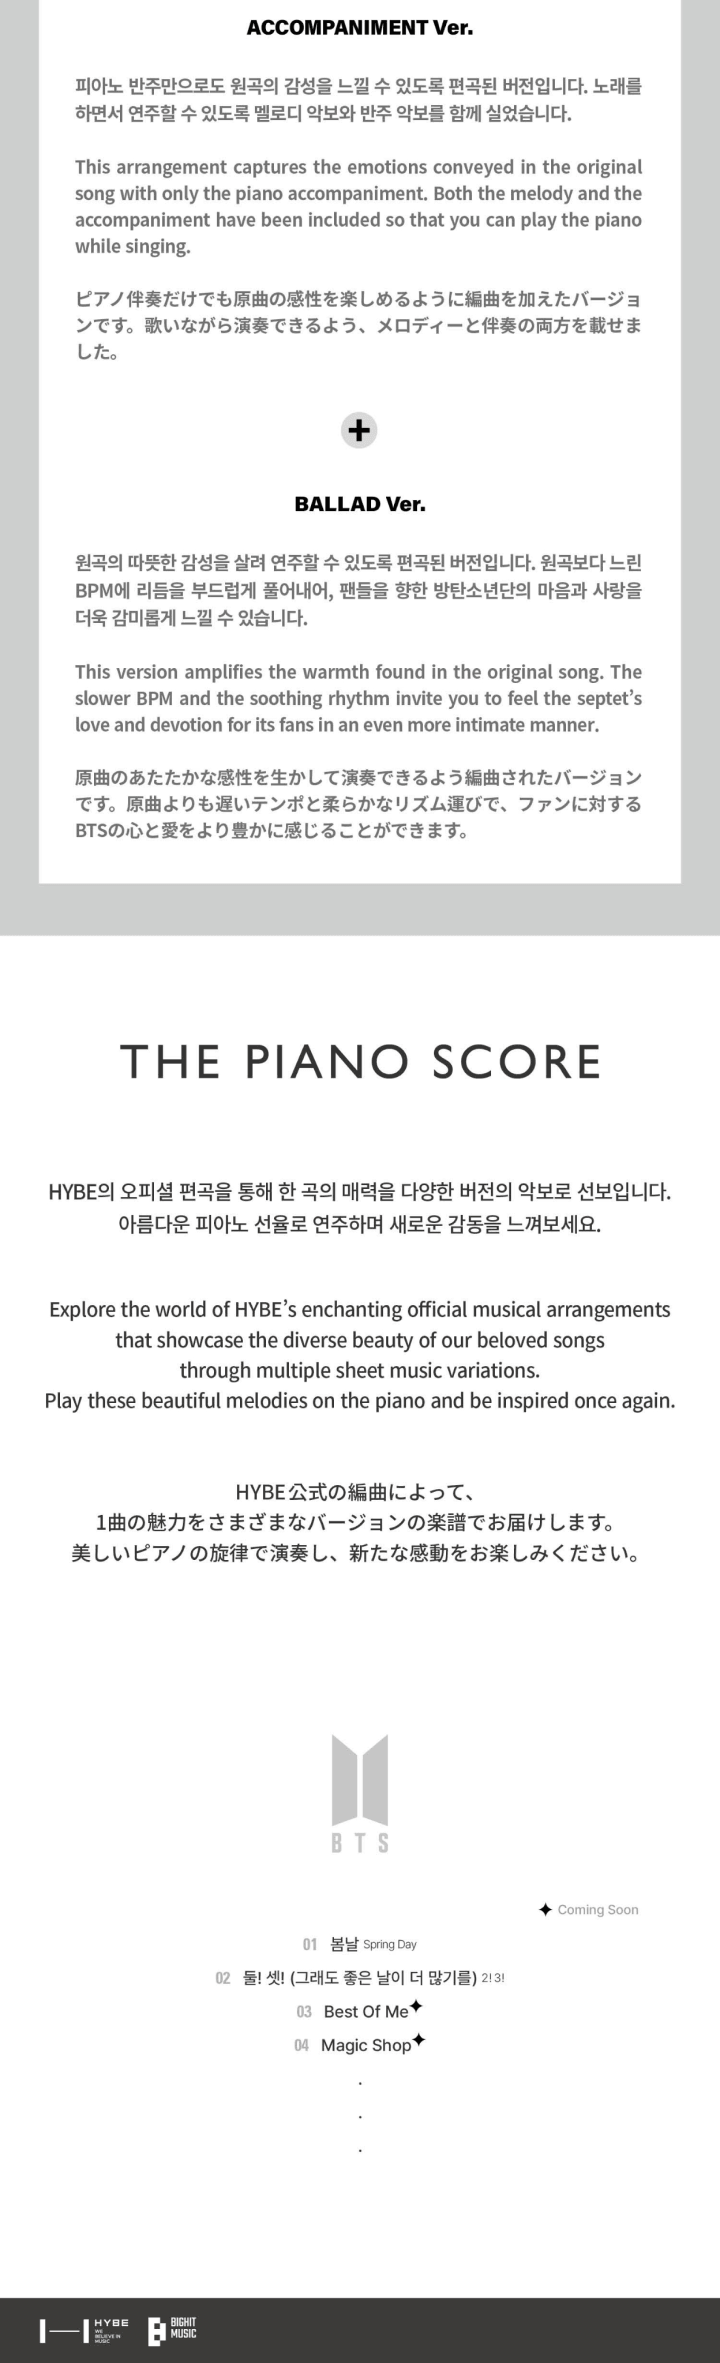 BTS THE PIANO SCORE BOOK: 2! 3! (Still Wishing For More Good Days)